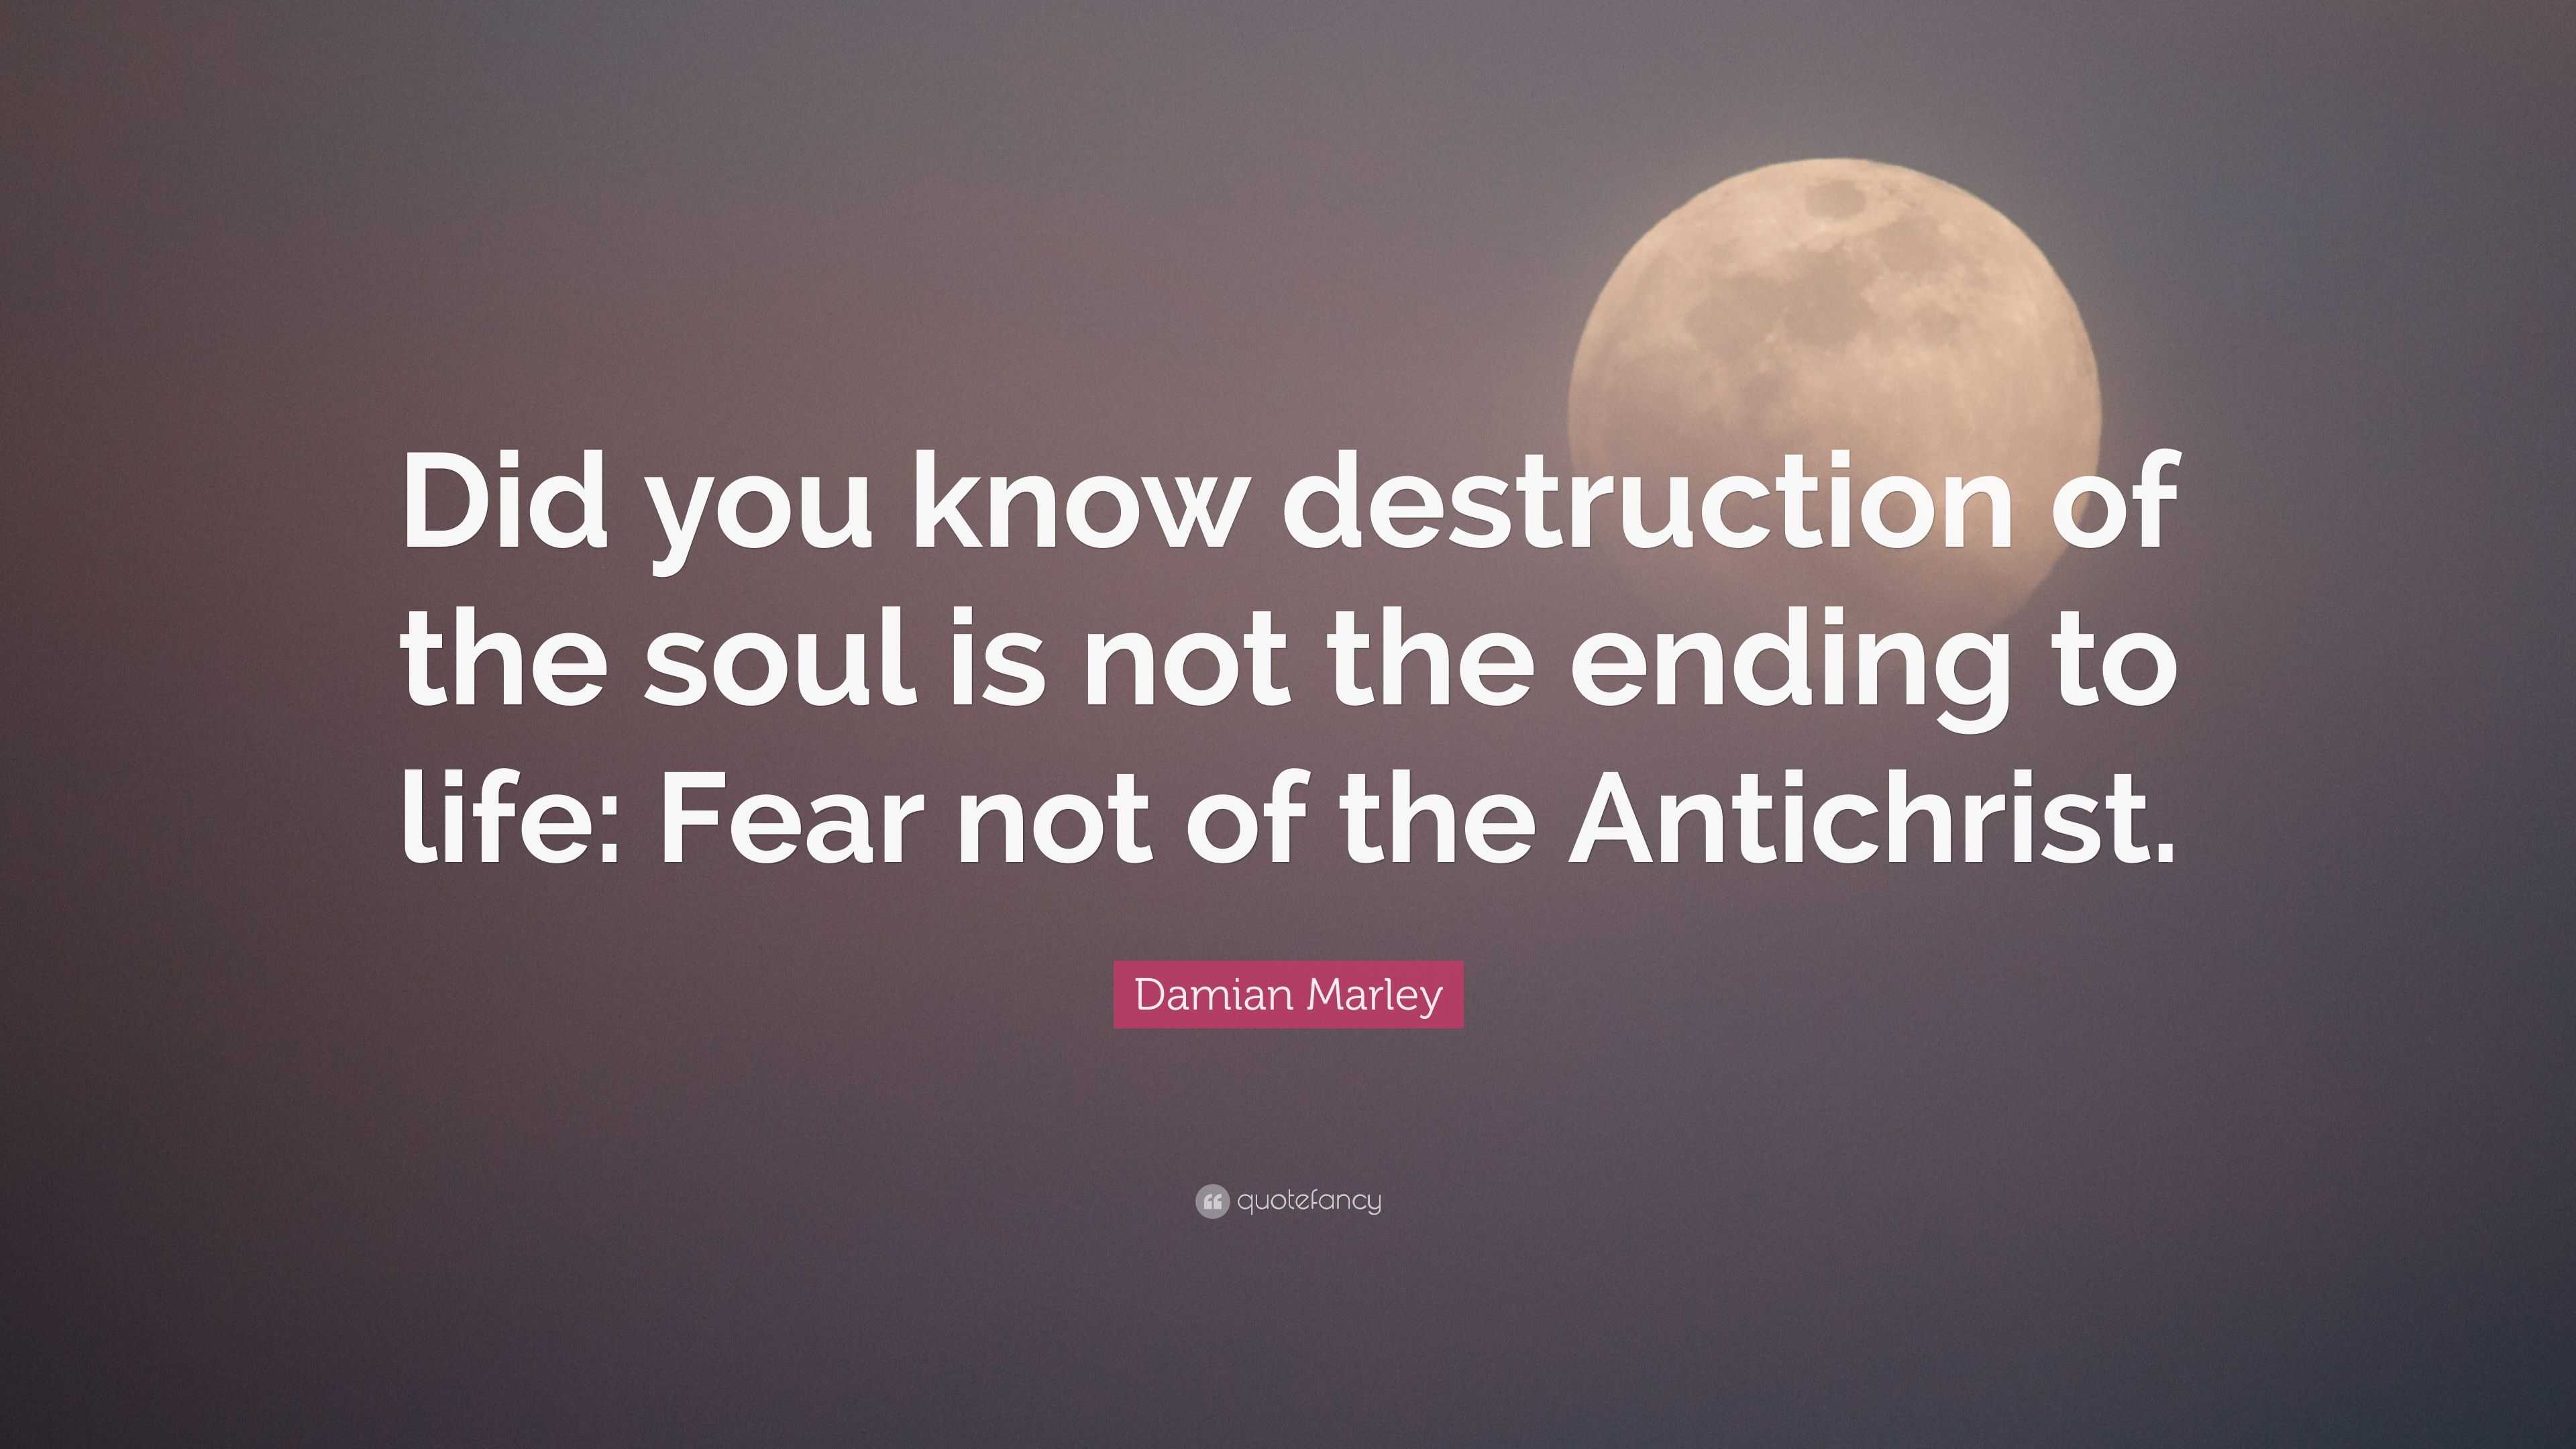 Damian Marley Quote: "Did you know destruction of the soul ...